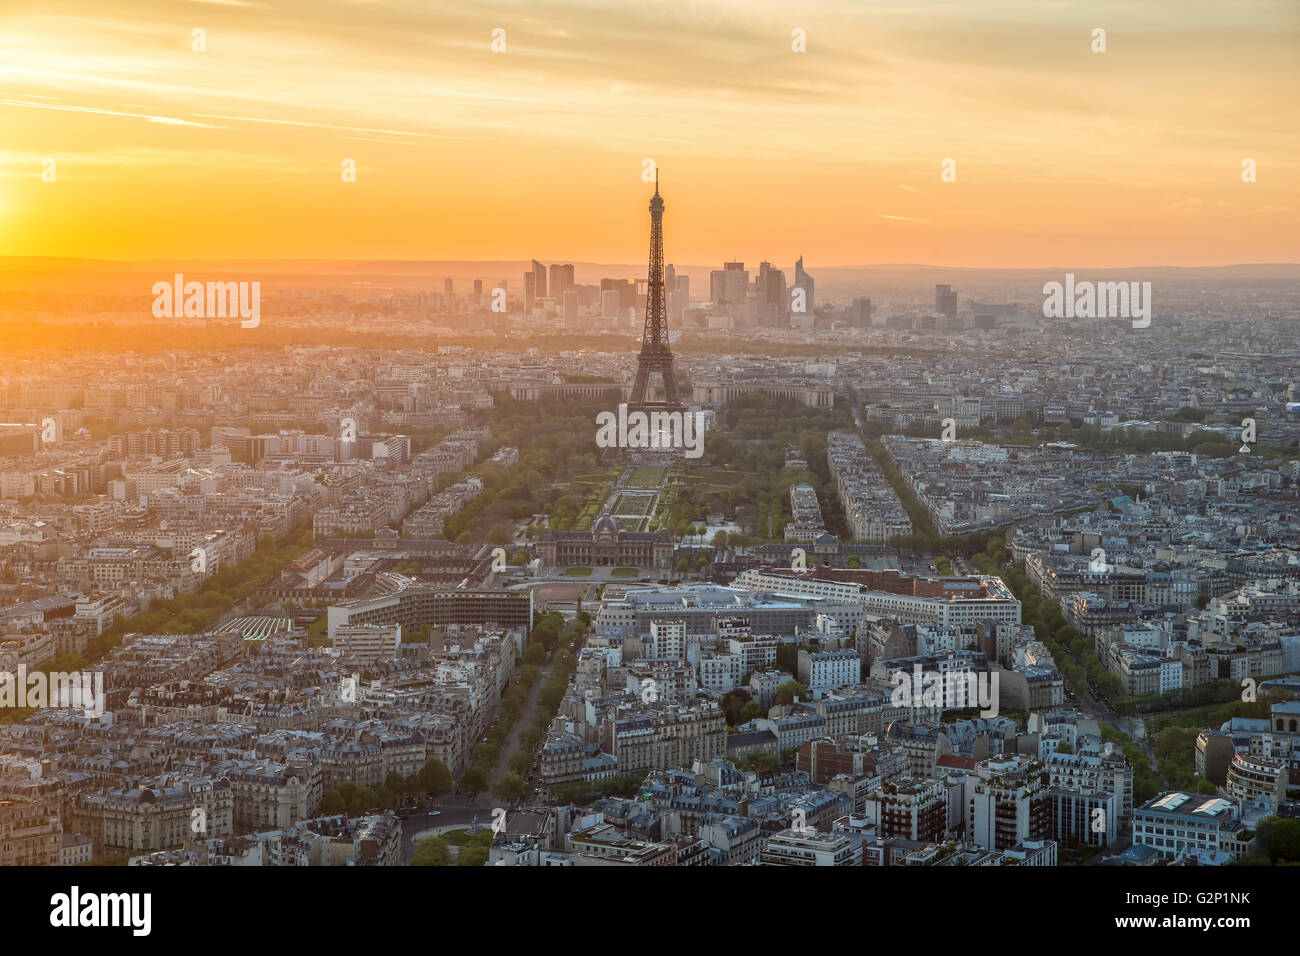 Aerial view of Paris skyline at sunset, France Stock Photo